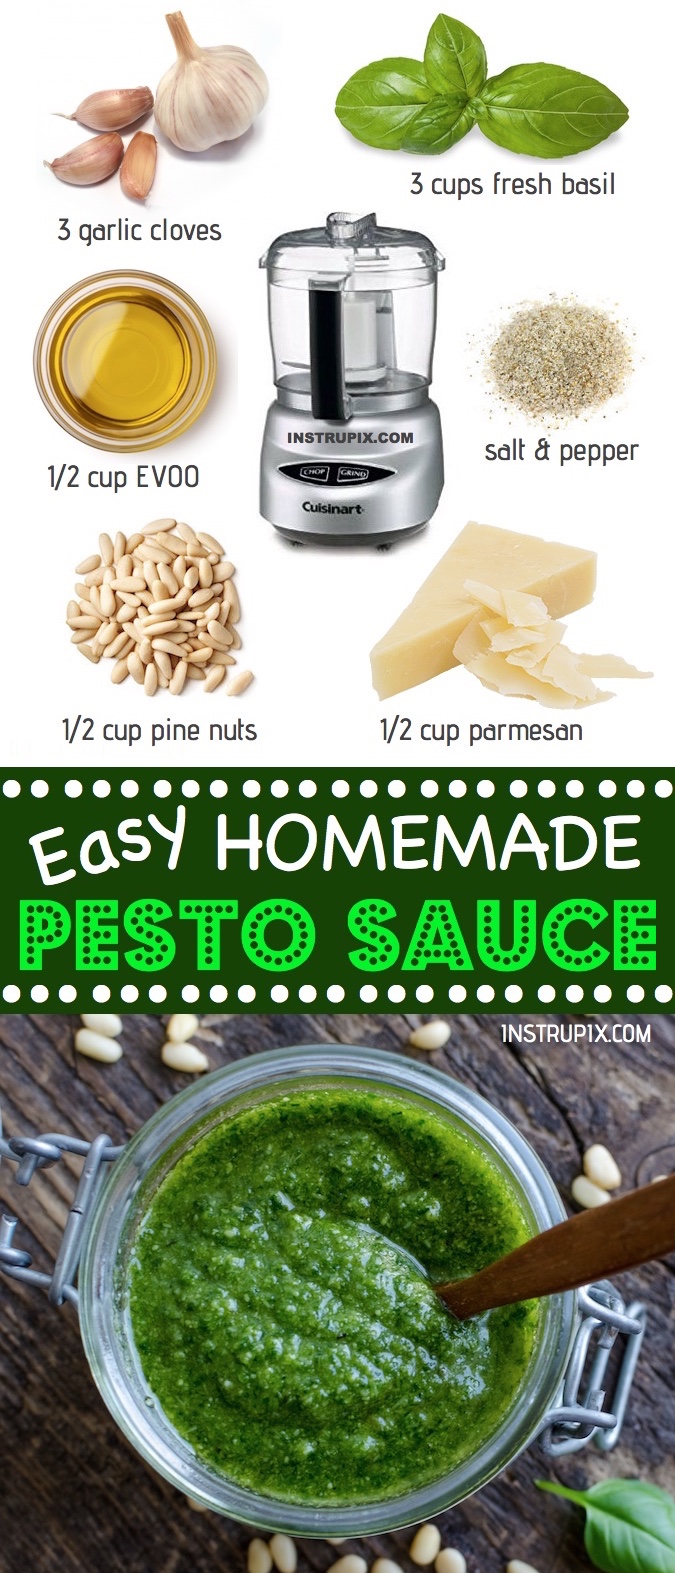 Quick and Easy healthy homemade basil pesto sauce! Great for pizza, pasta, sandwiches and more. A simple pesto recipe! Never make store bought again. 